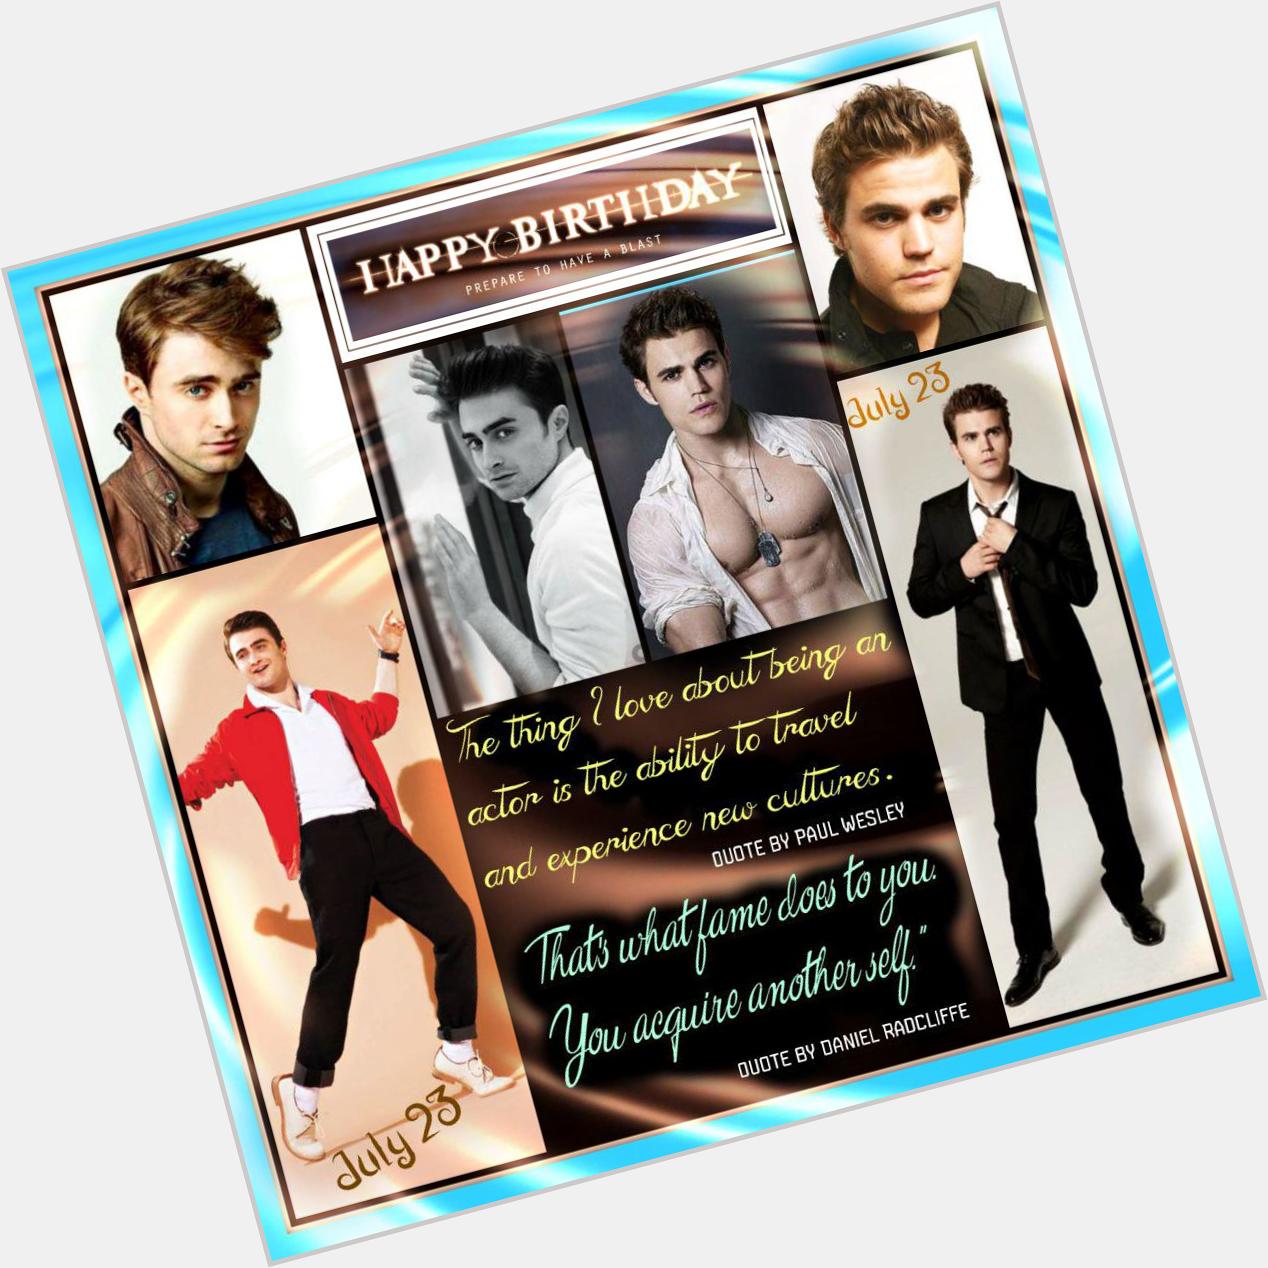 Happy Birthday Paul Wesley and Daniel Radcliffe - July 23 Event  